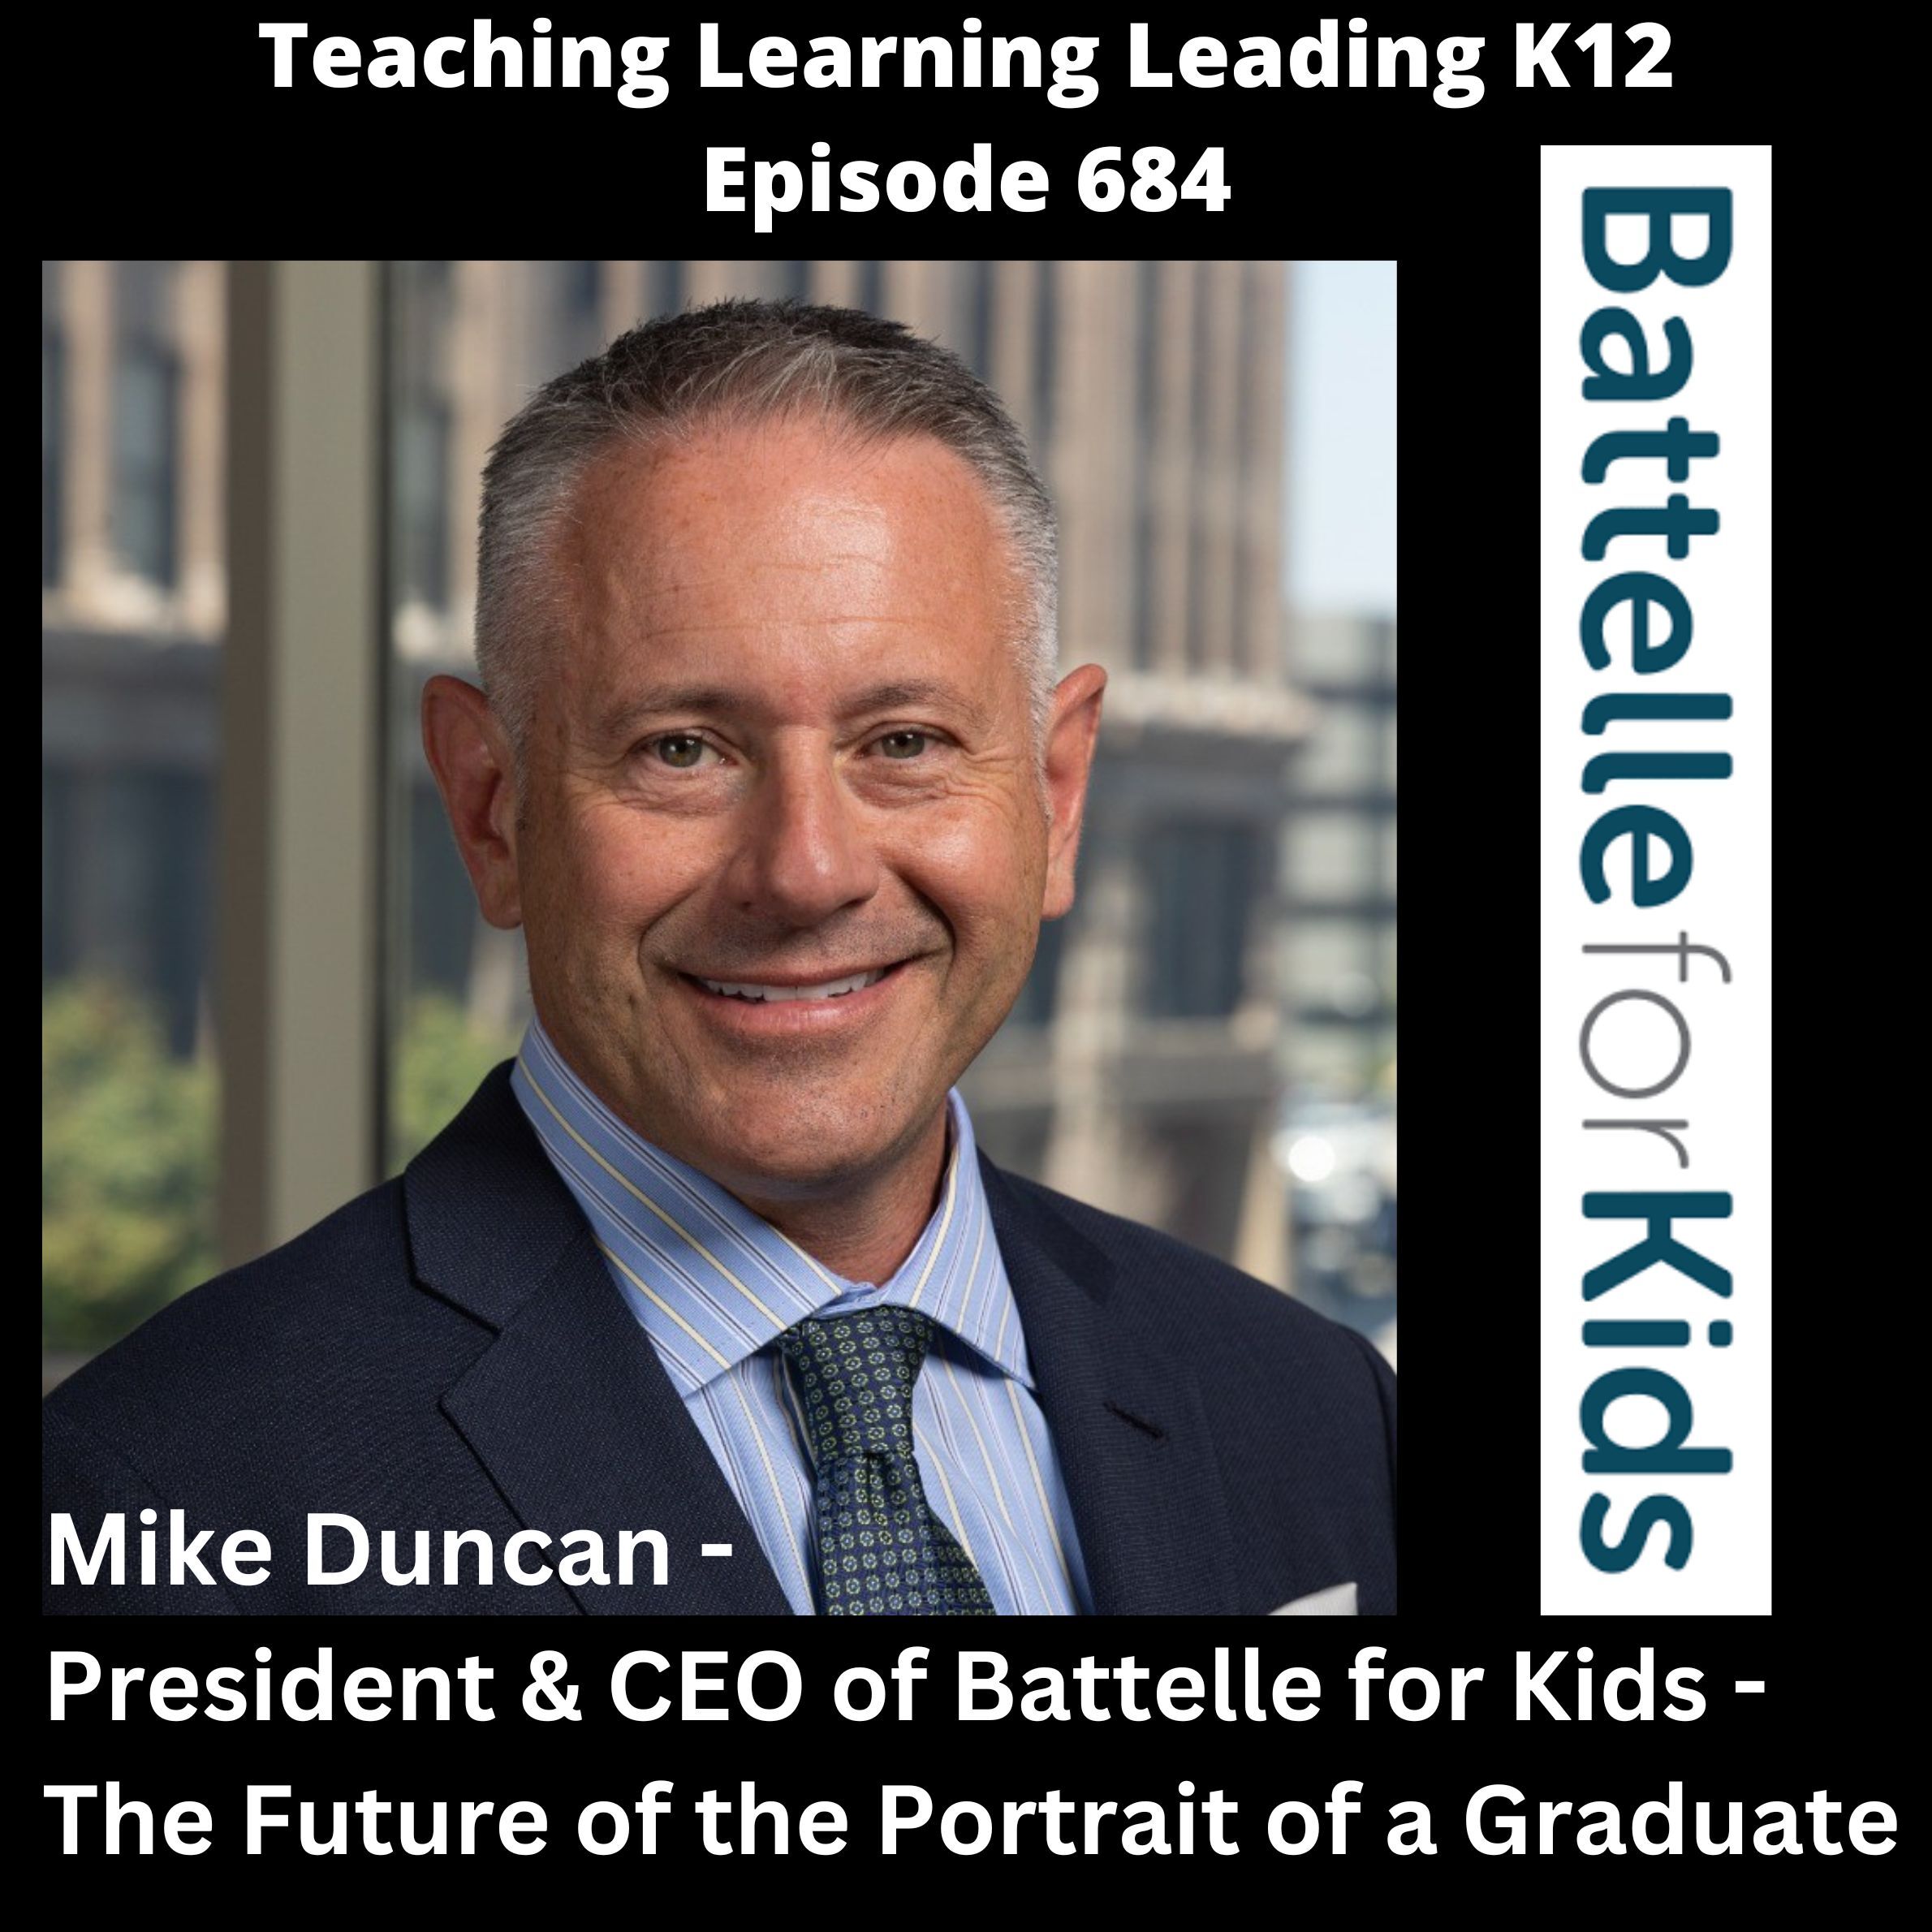 Mike Duncan - President & CEO of Battelle for Kids - The Future of the Portrait of a Graduate - 684